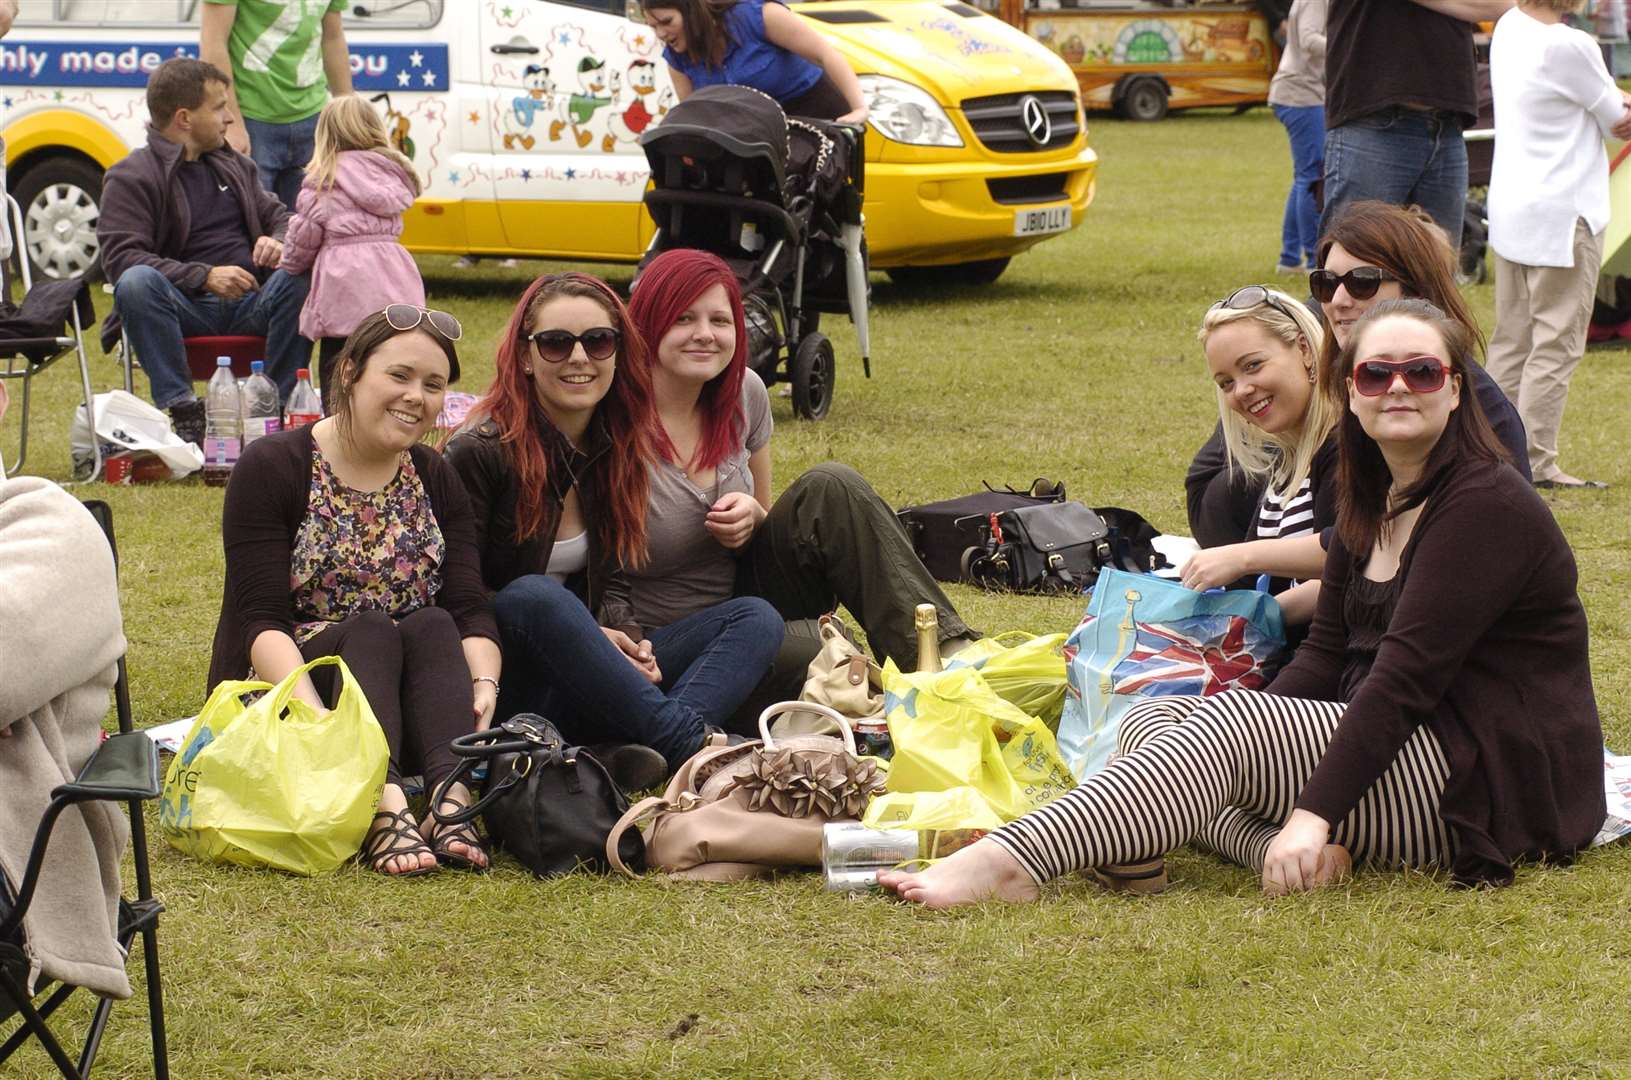 More people will descend on Central Park for the Dartford Festival this summer.